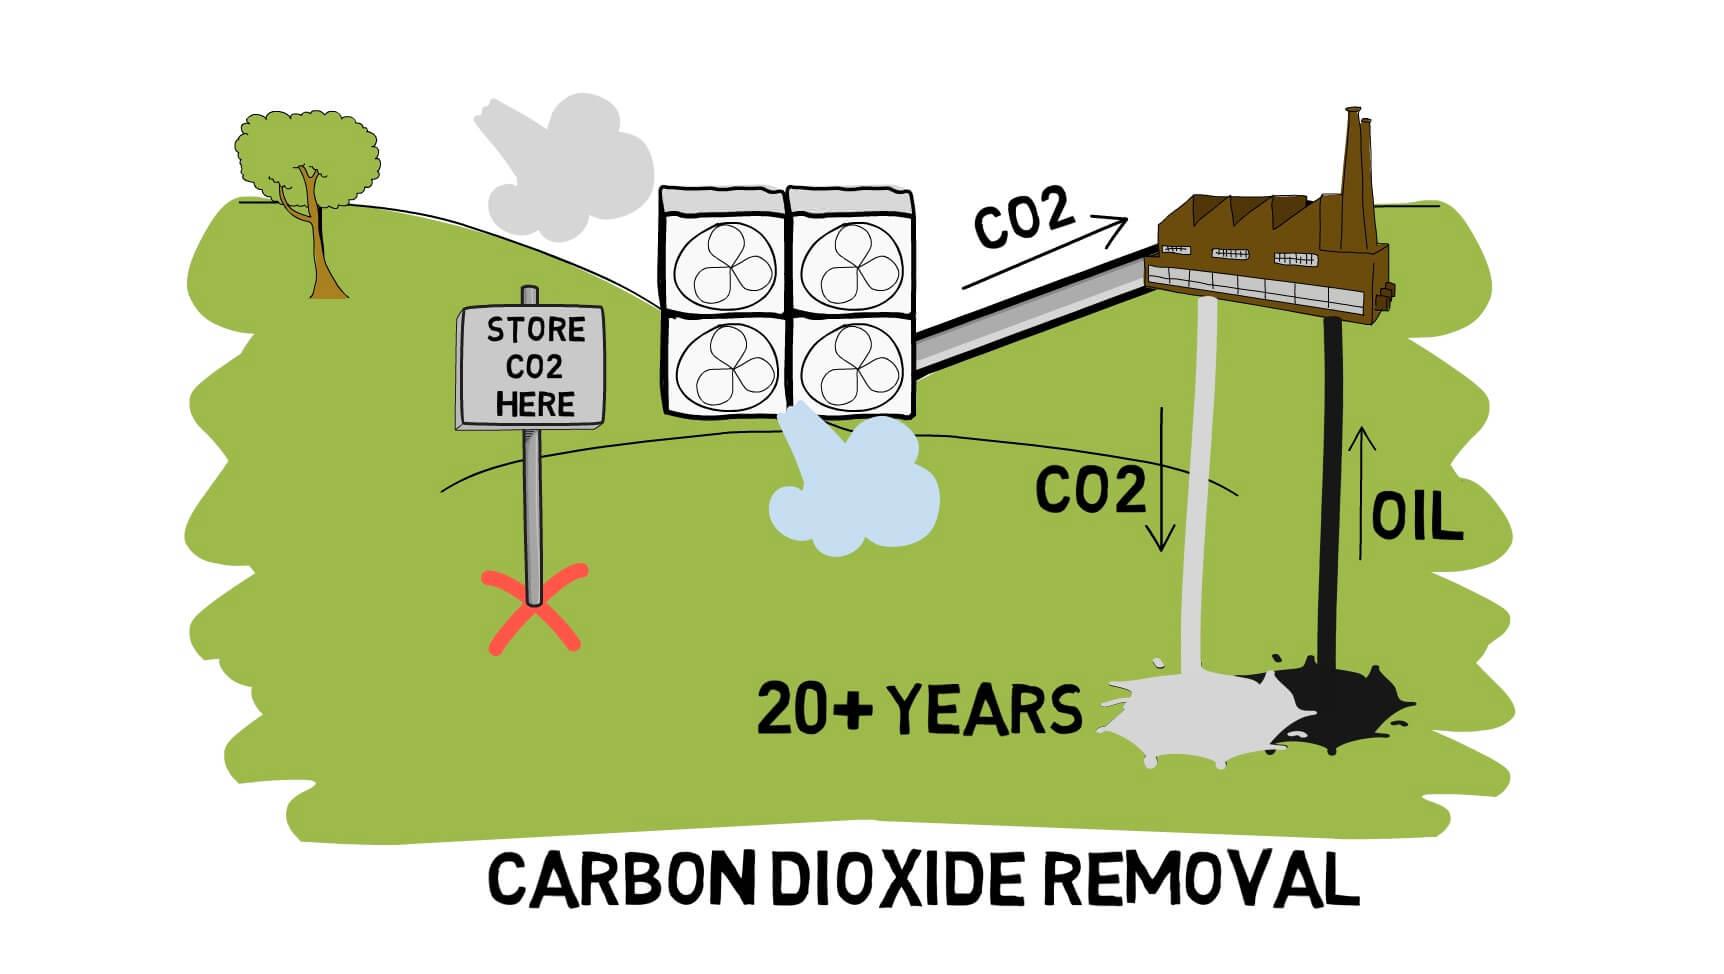 Carbon dioxide removal